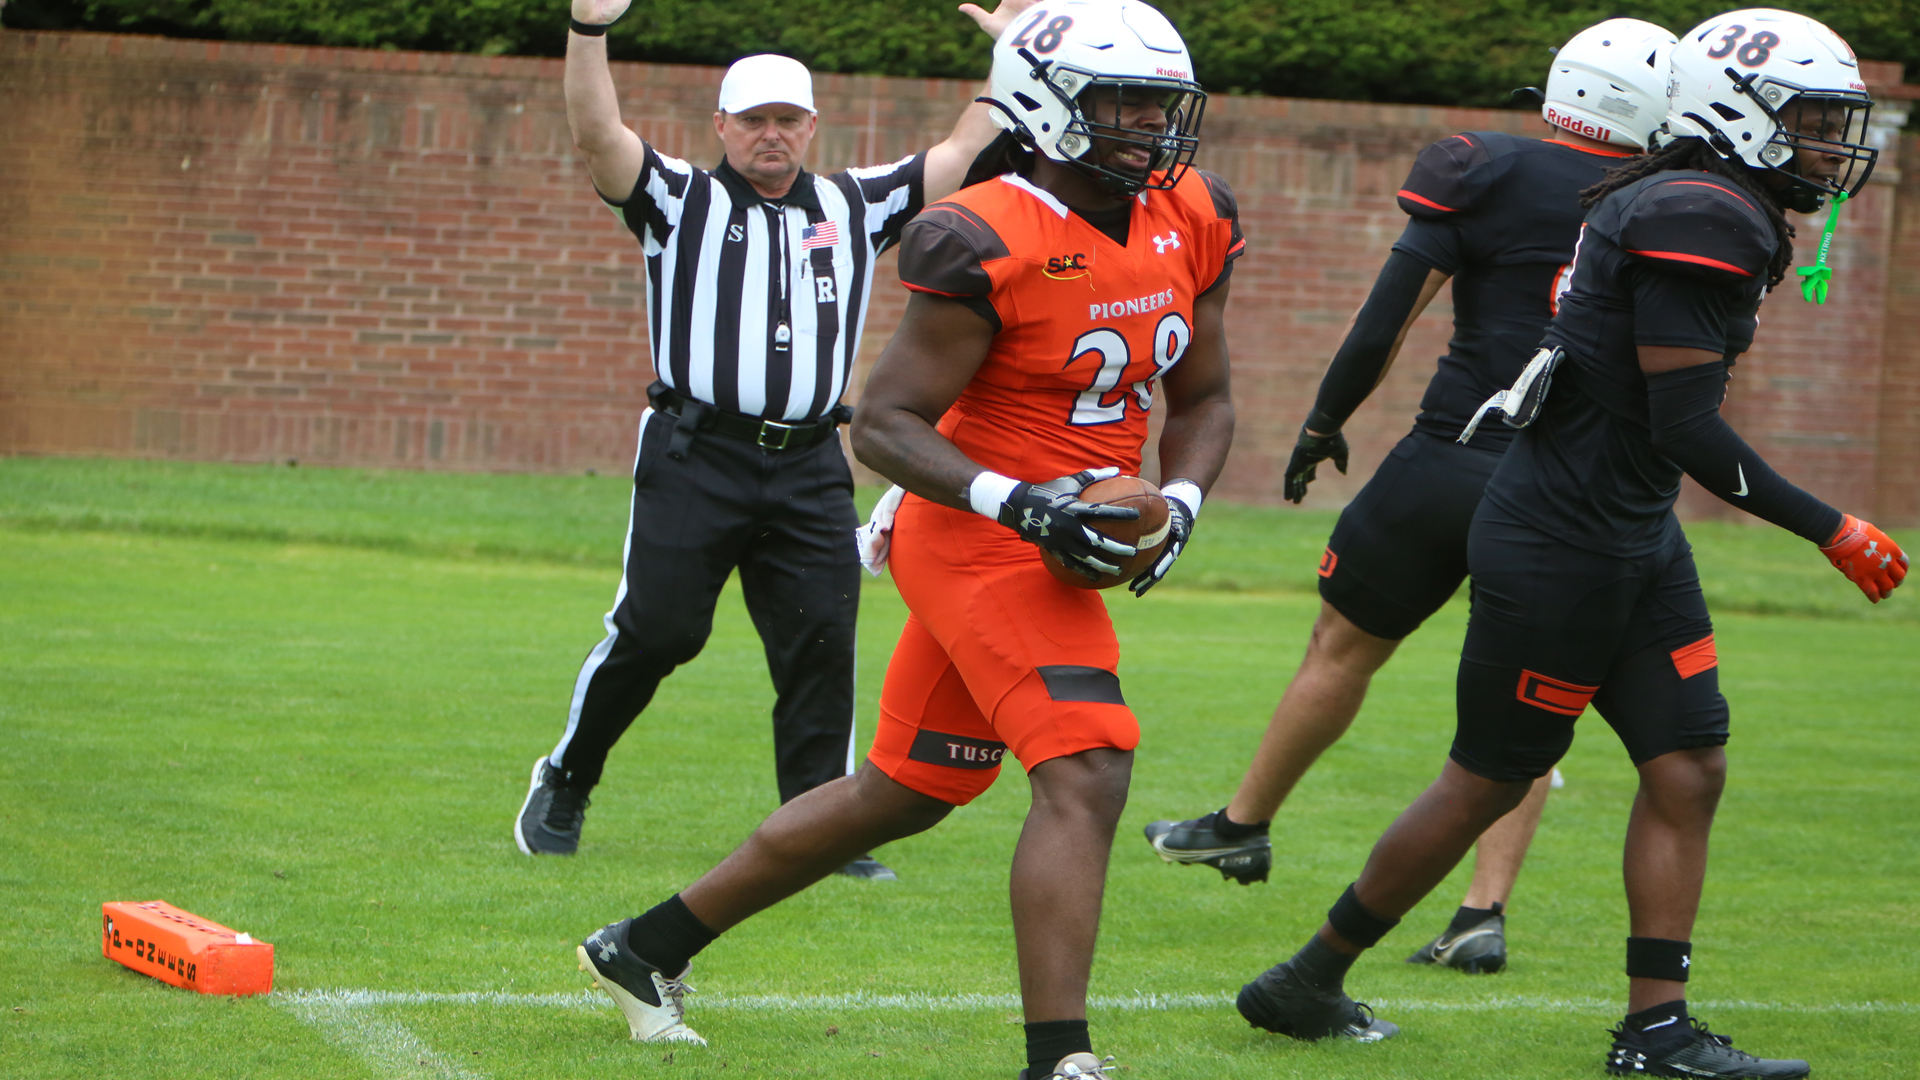 Reggie Hunter scored the game-winning TD on the final play of the game for TU Orange at the Tusculum Spring Football Game (photo by Dom Donnelly)